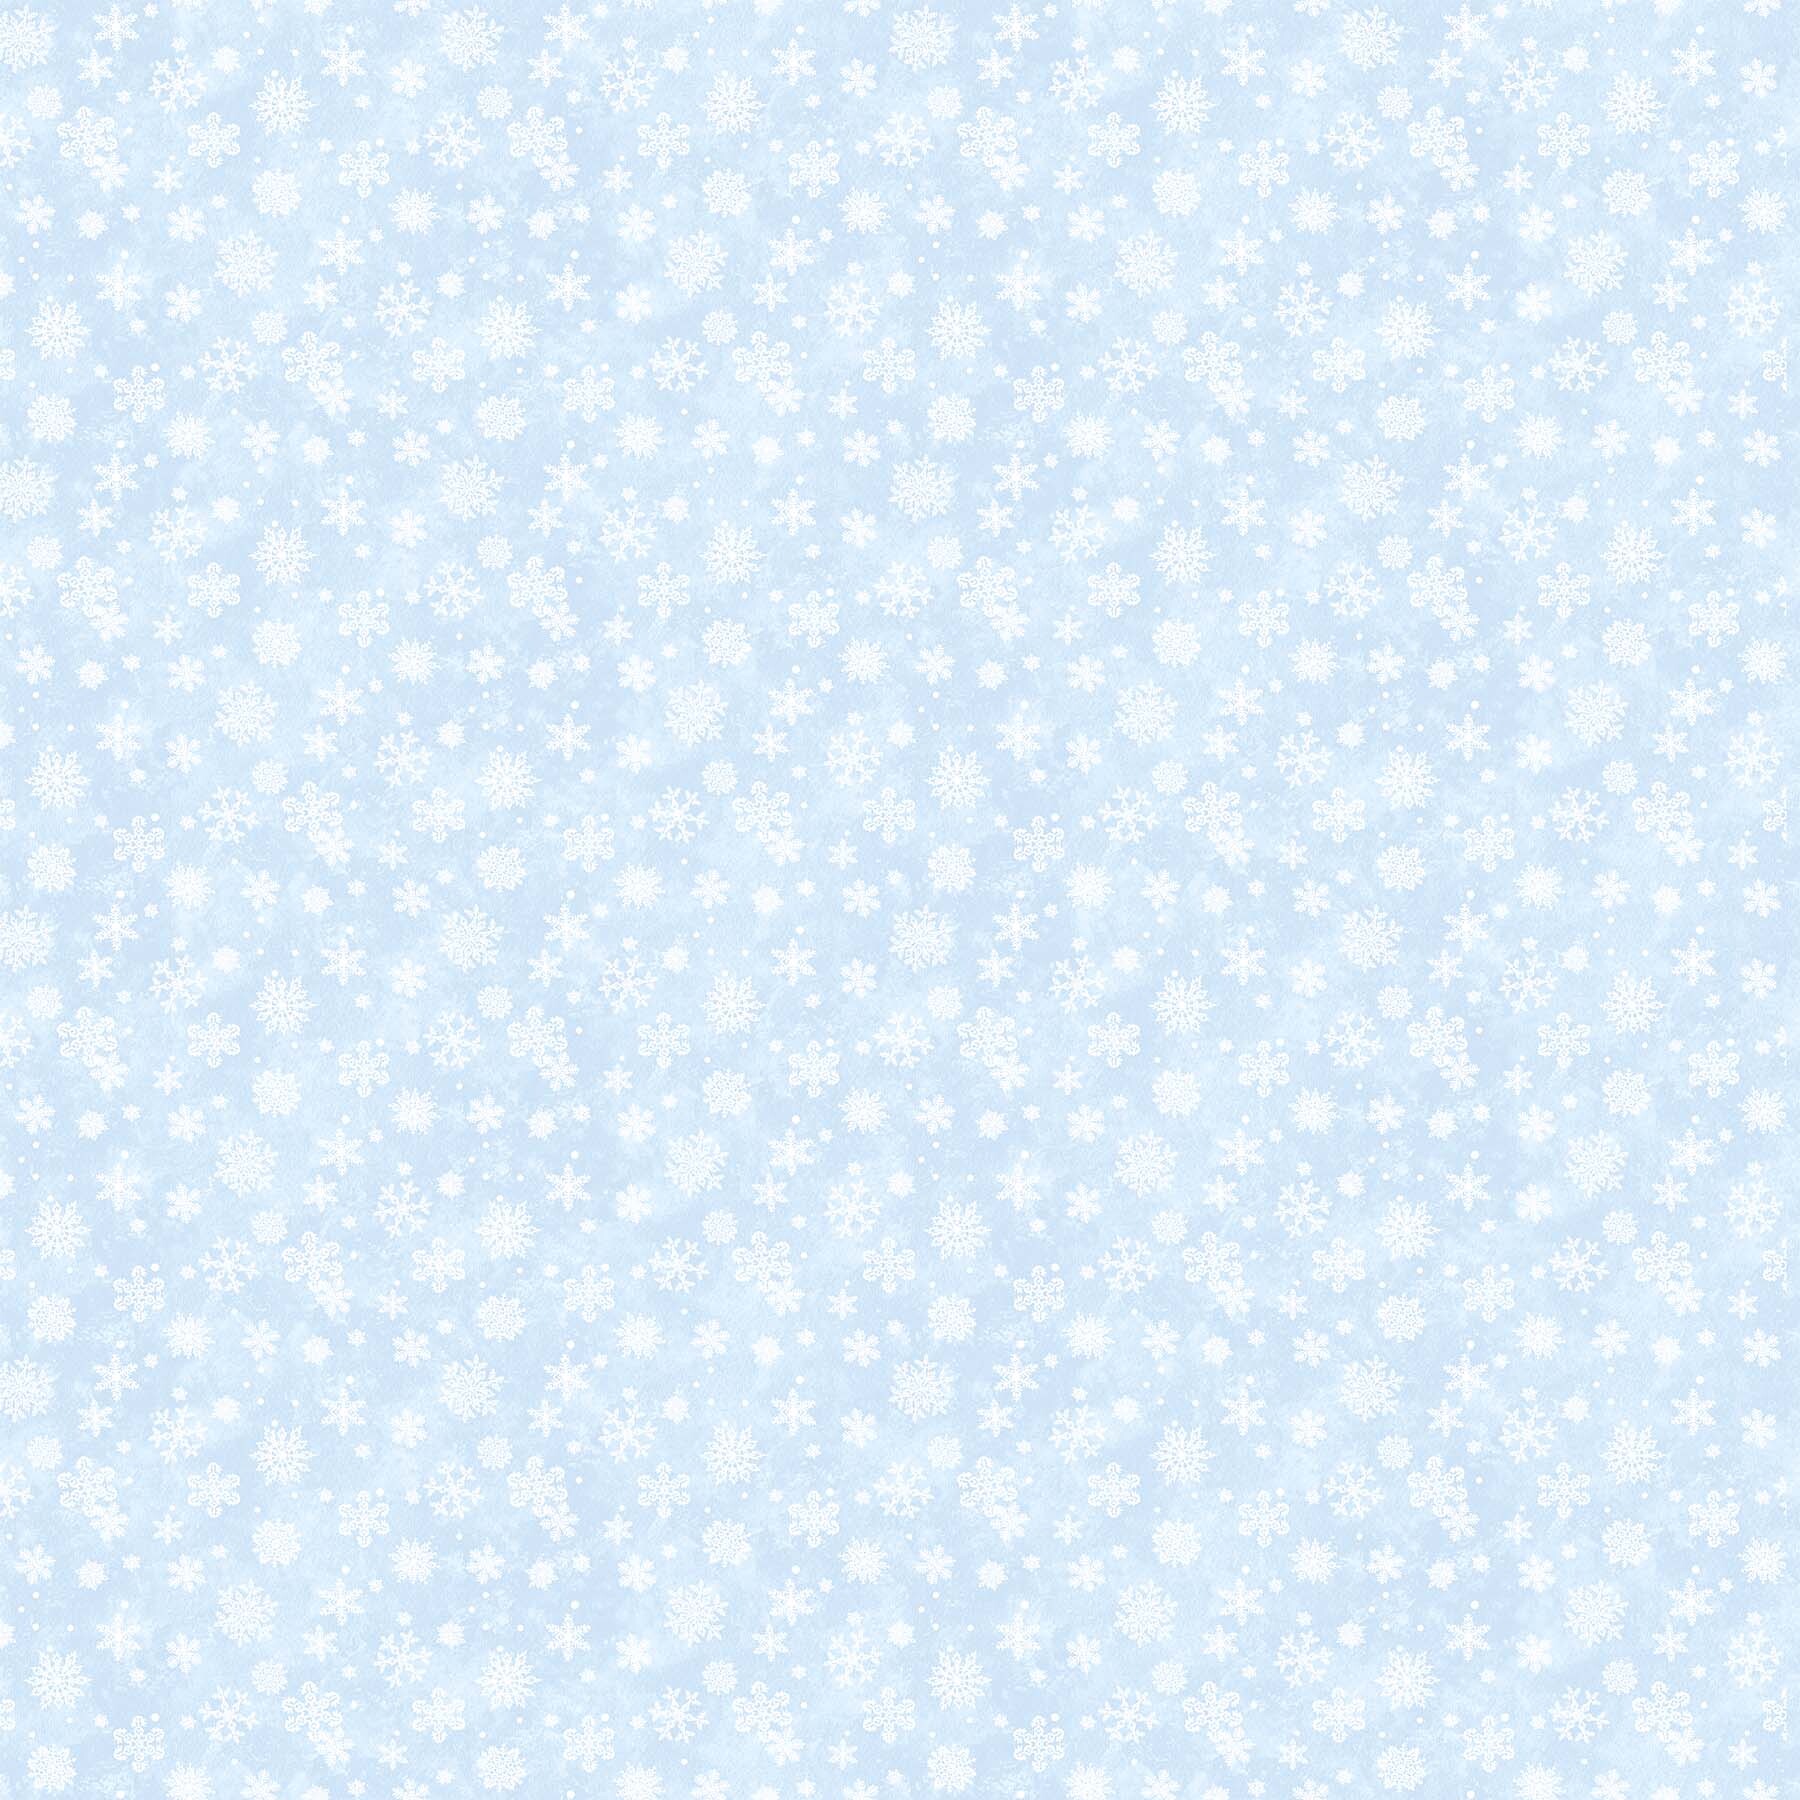 Father Christmas - Light Blue with White Snowflakes - Small - 1/2m cut 58747